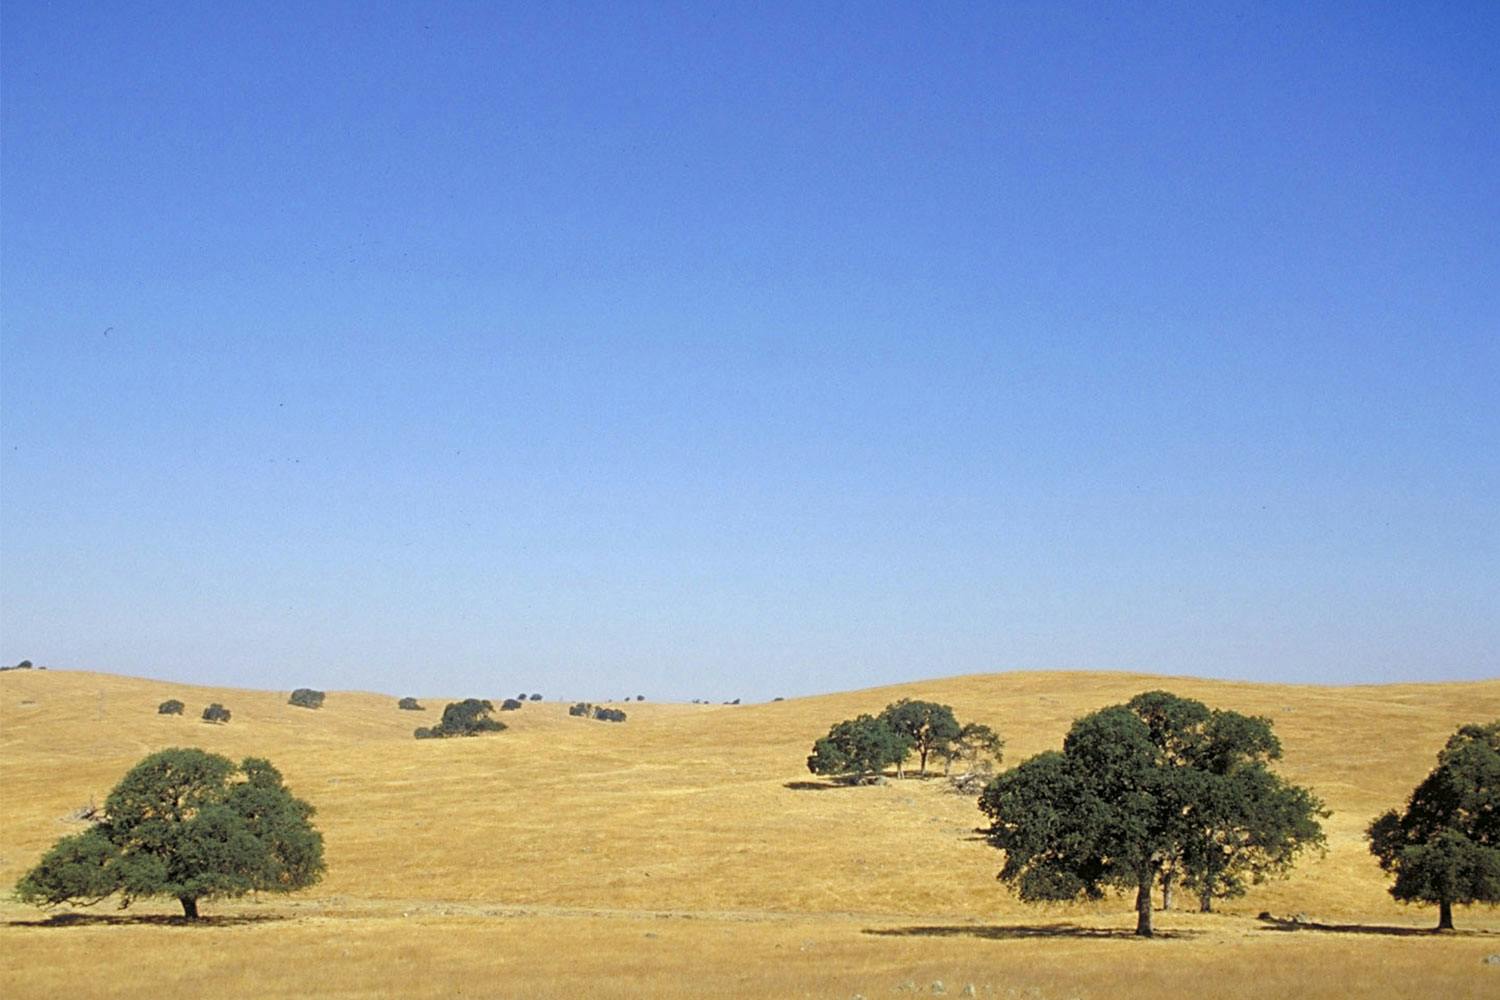 Rolling hills in California, covered in golden grass and dotted sparsely with low trees, under a cloudless blue sky.